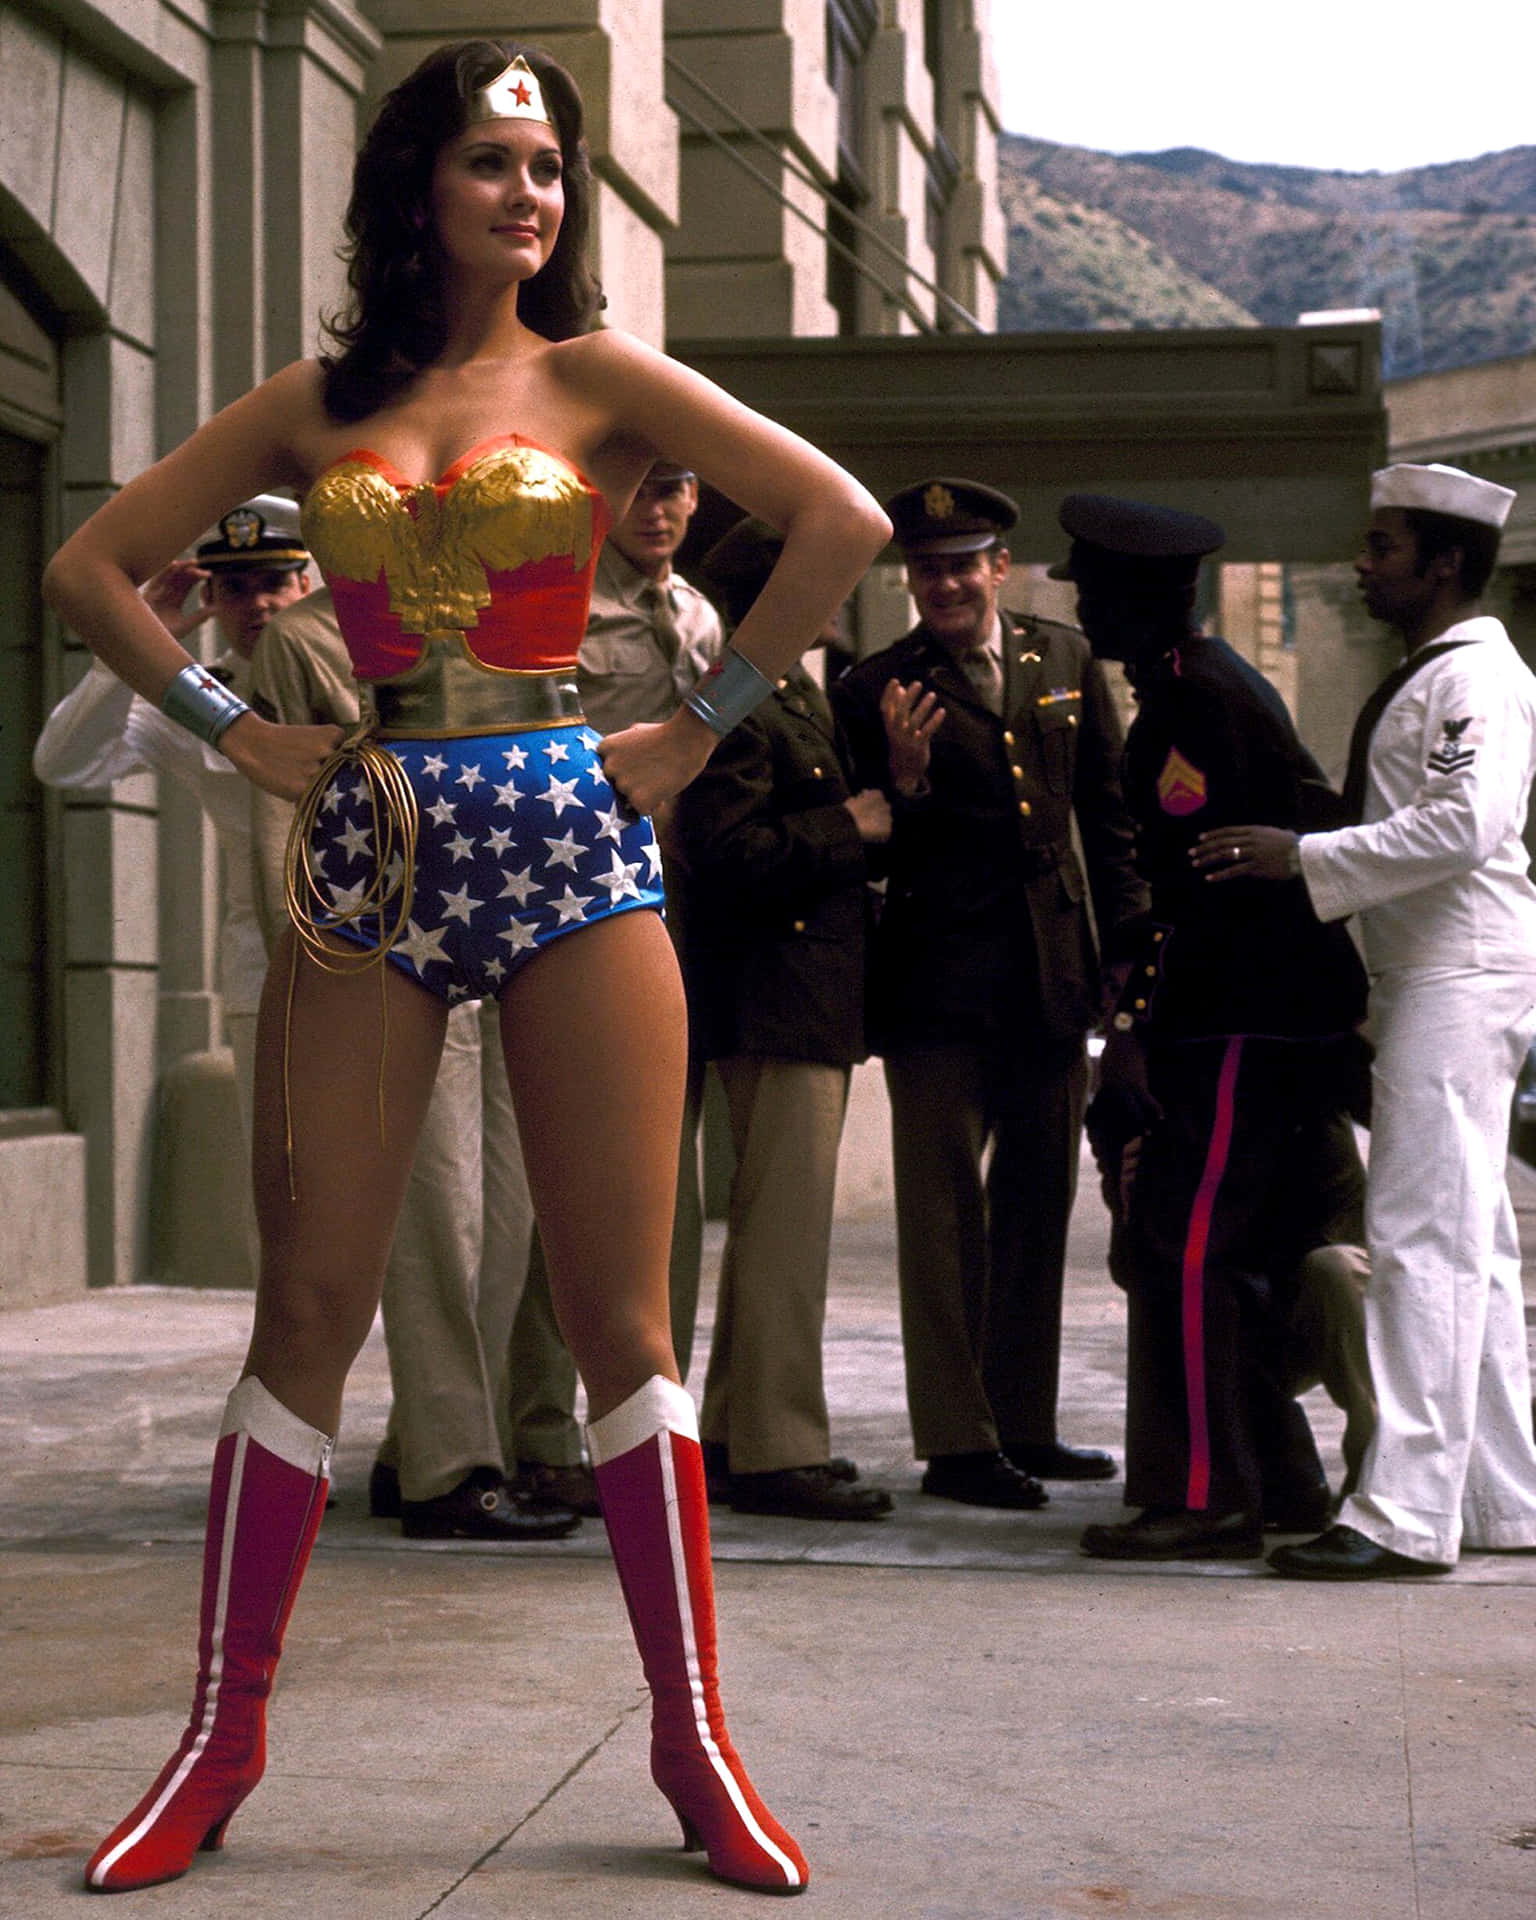 A Woman In A Wonder Woman Costume